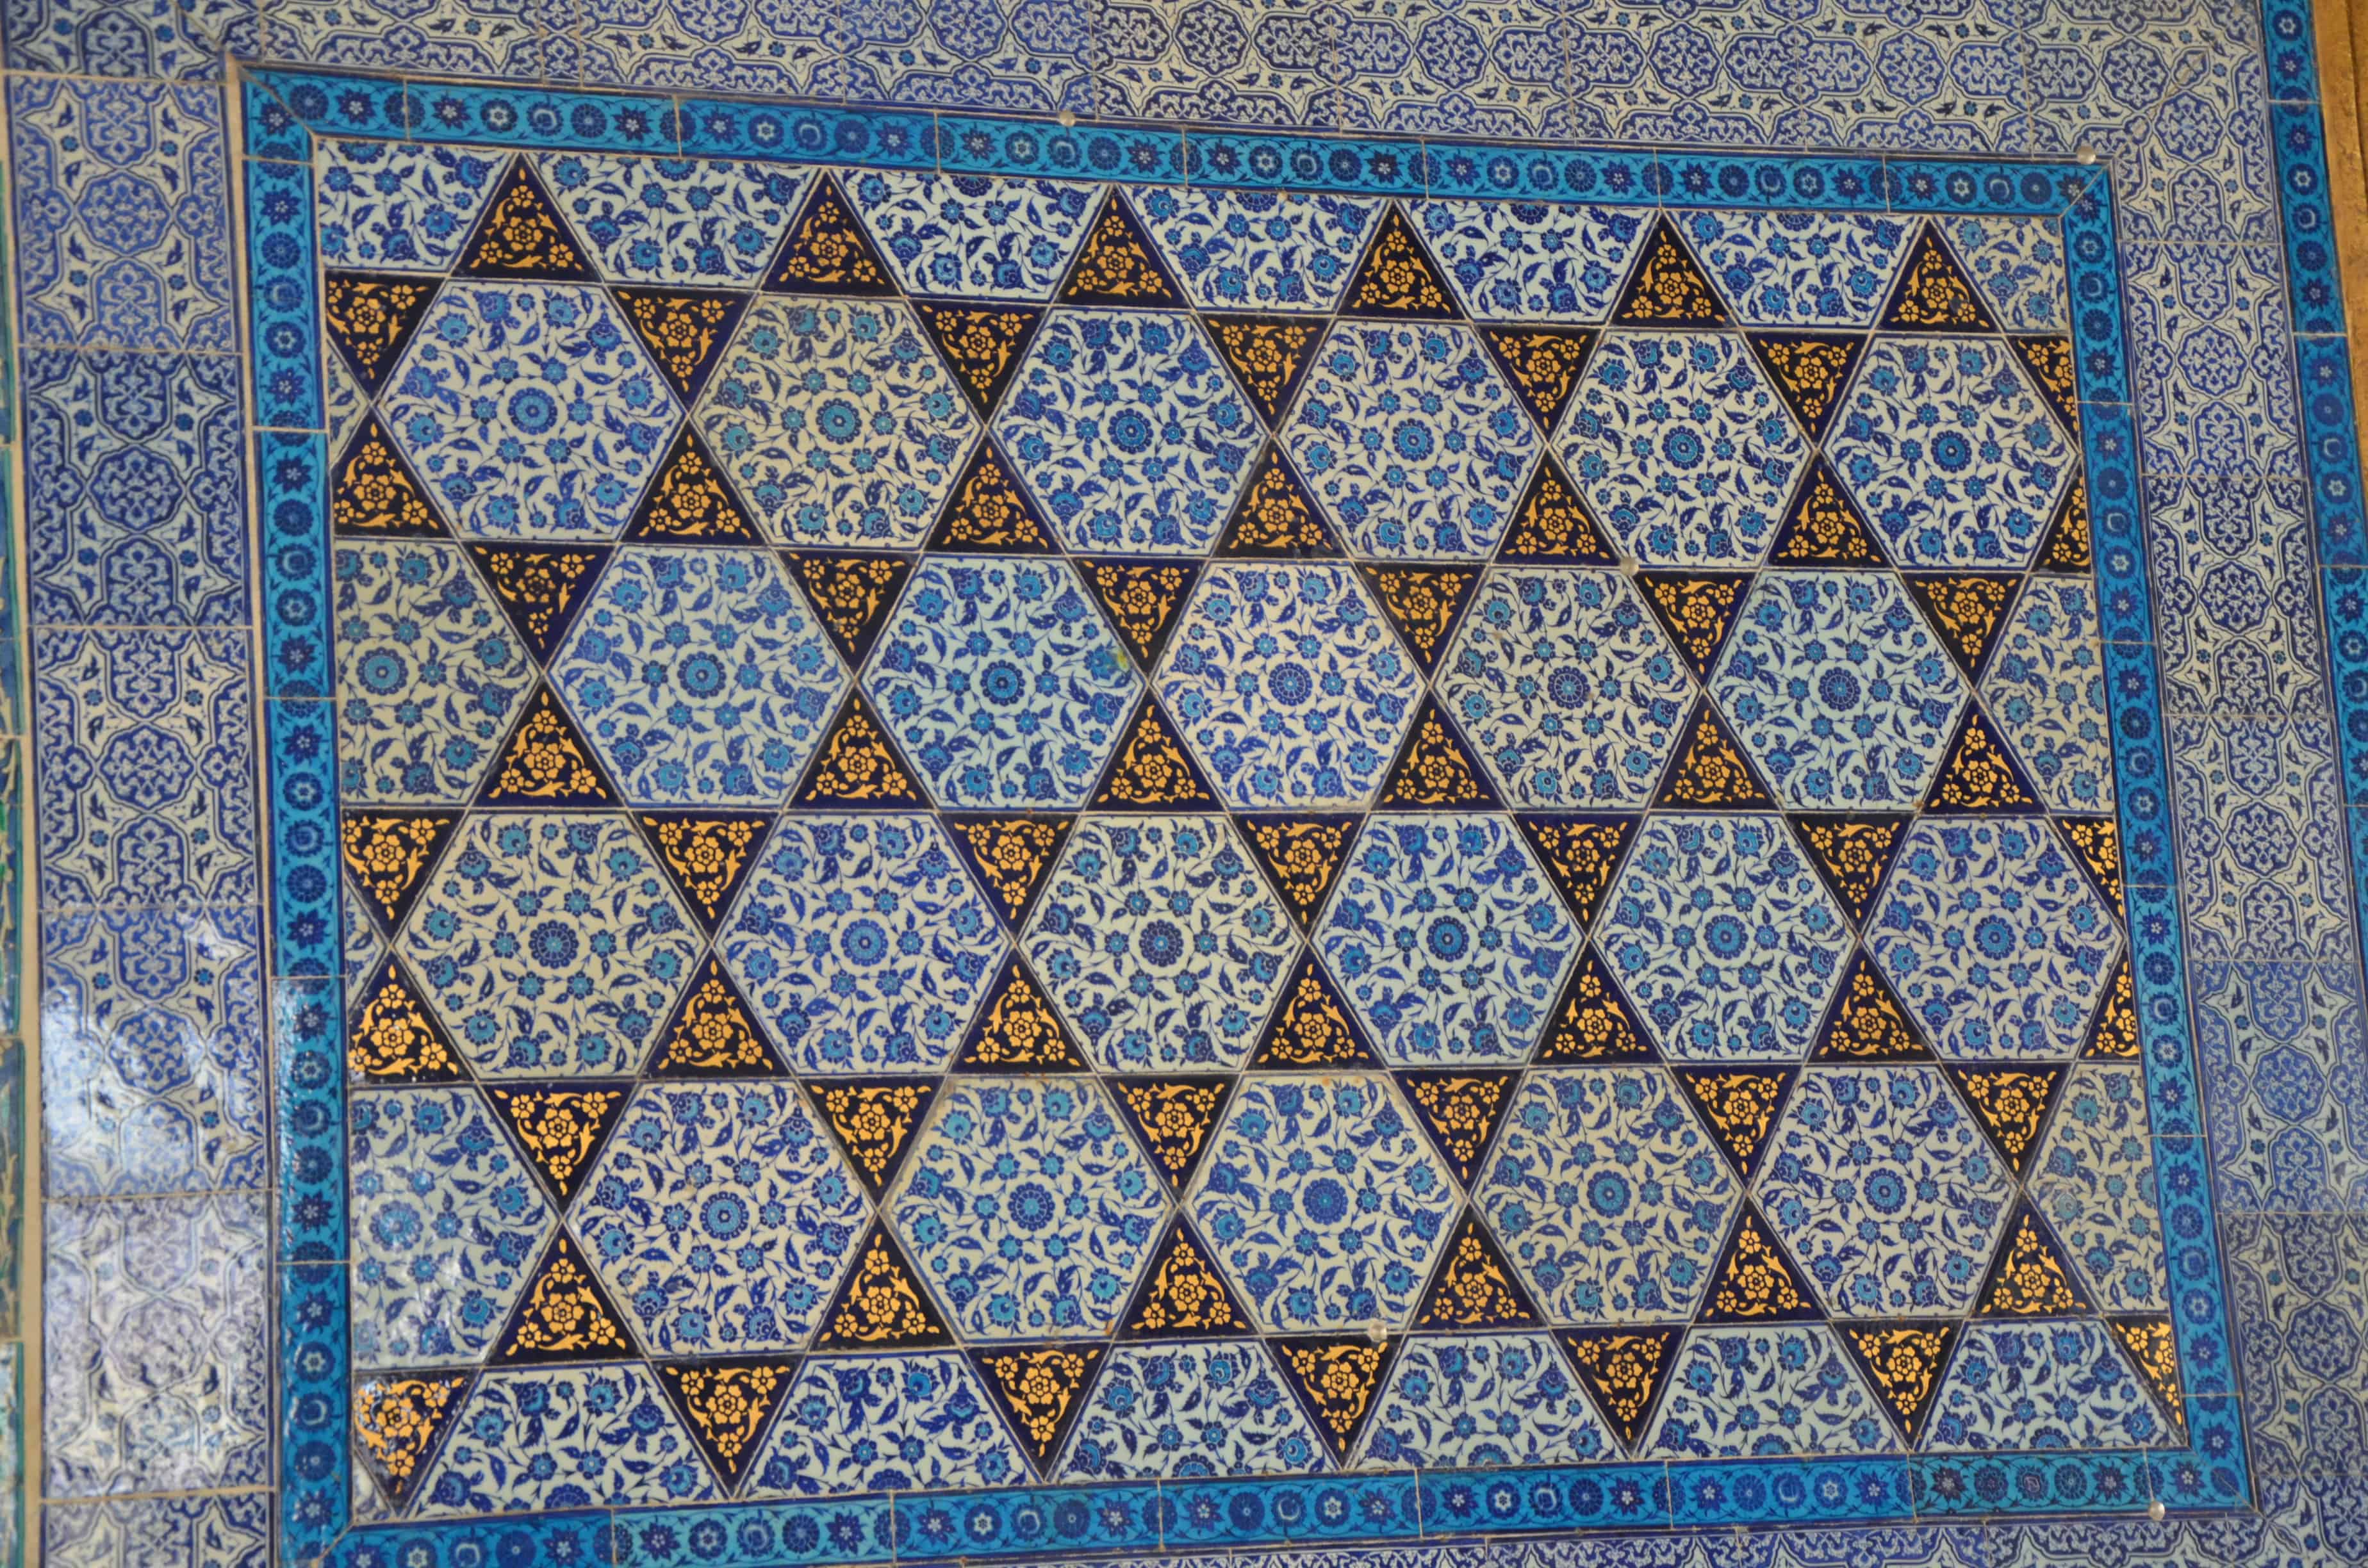 Exterior tiles of the Circumcision Room at Topkapi Palace in Istanbul, Turkey